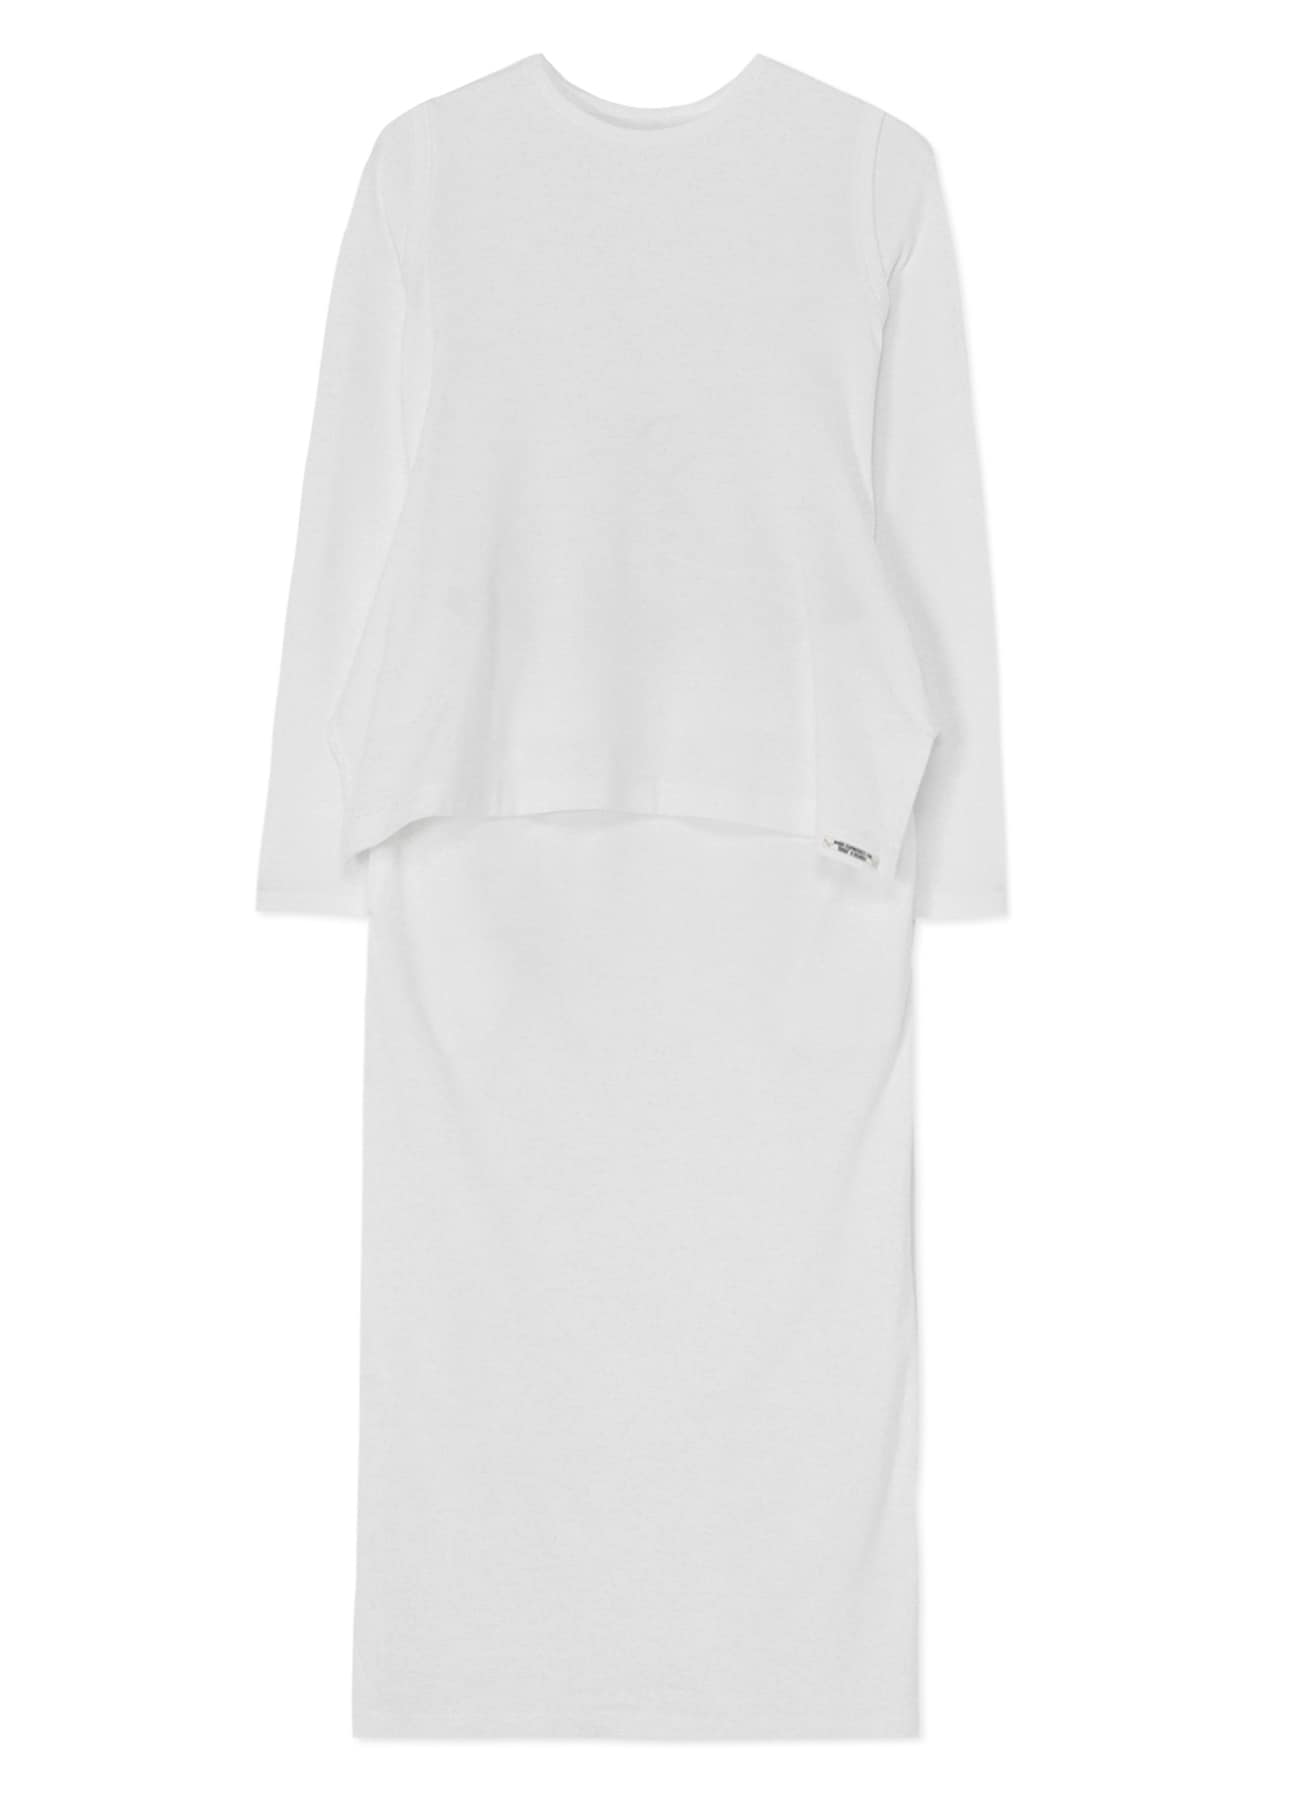 COMBED COTTON JERSEY DRESS